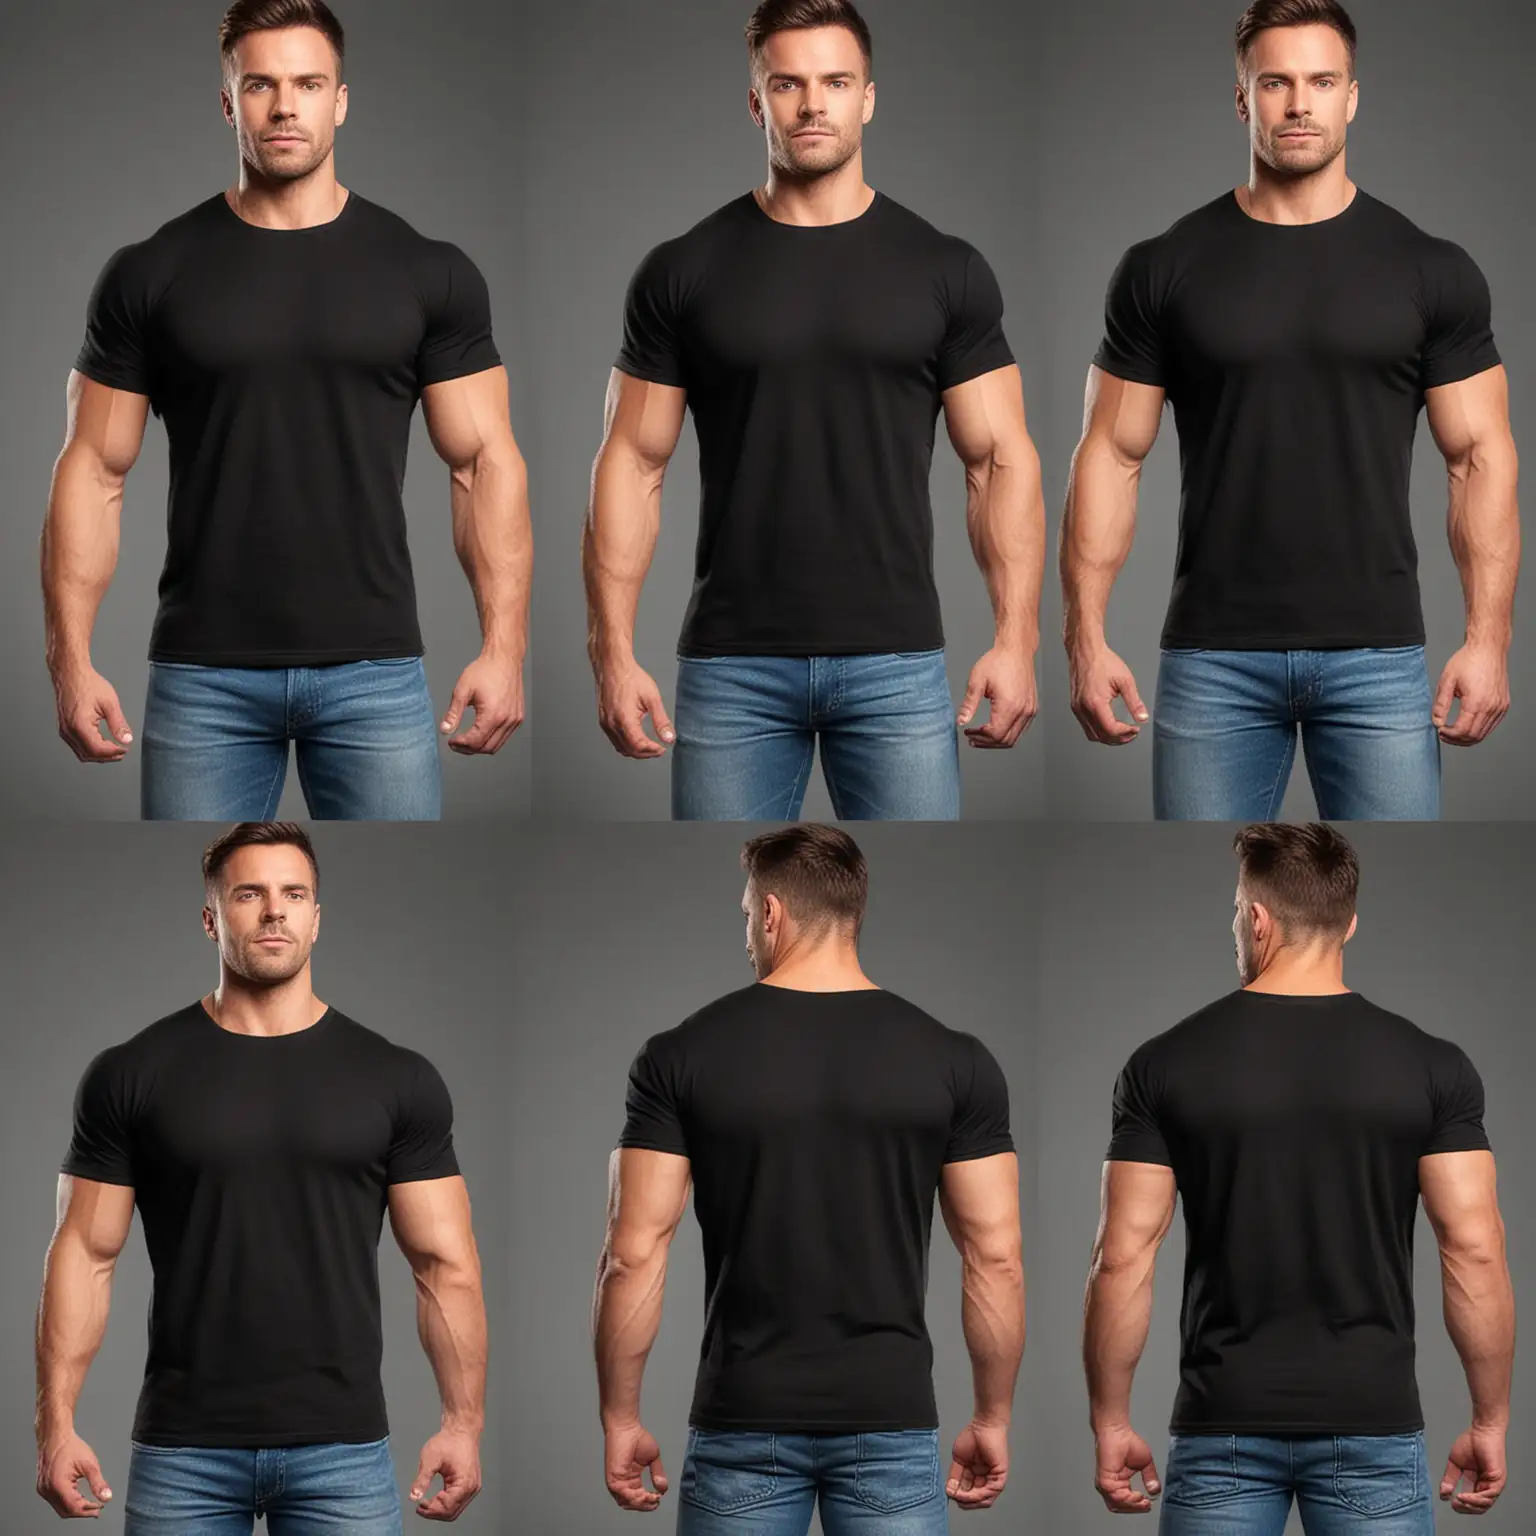 Muscular Male Model in Black TShirt from All Sides